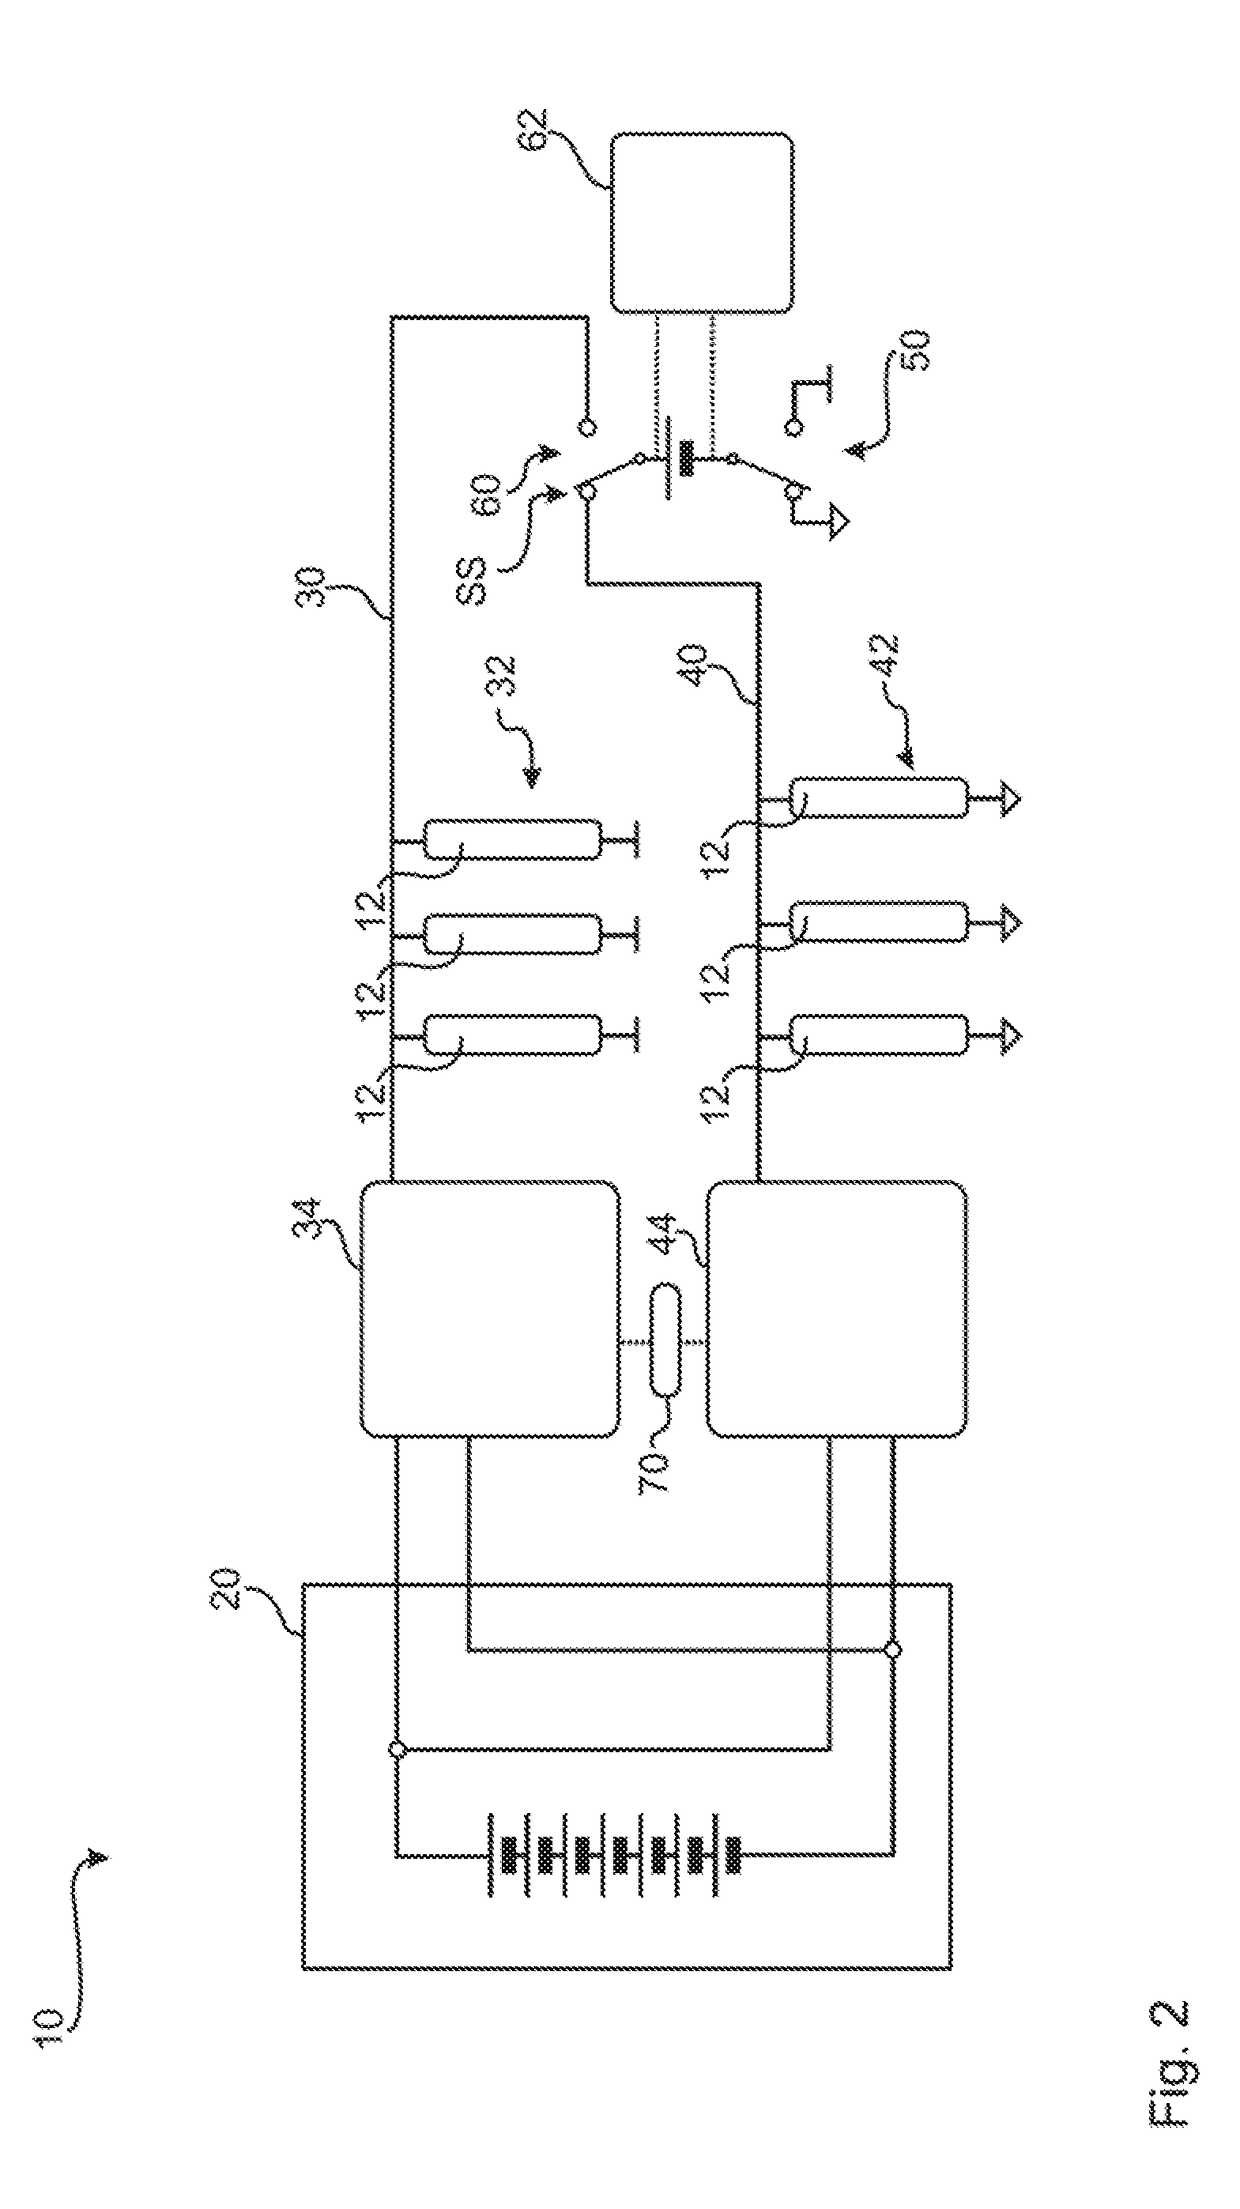 Vehicle electrical system arrangement for a motor vehicle